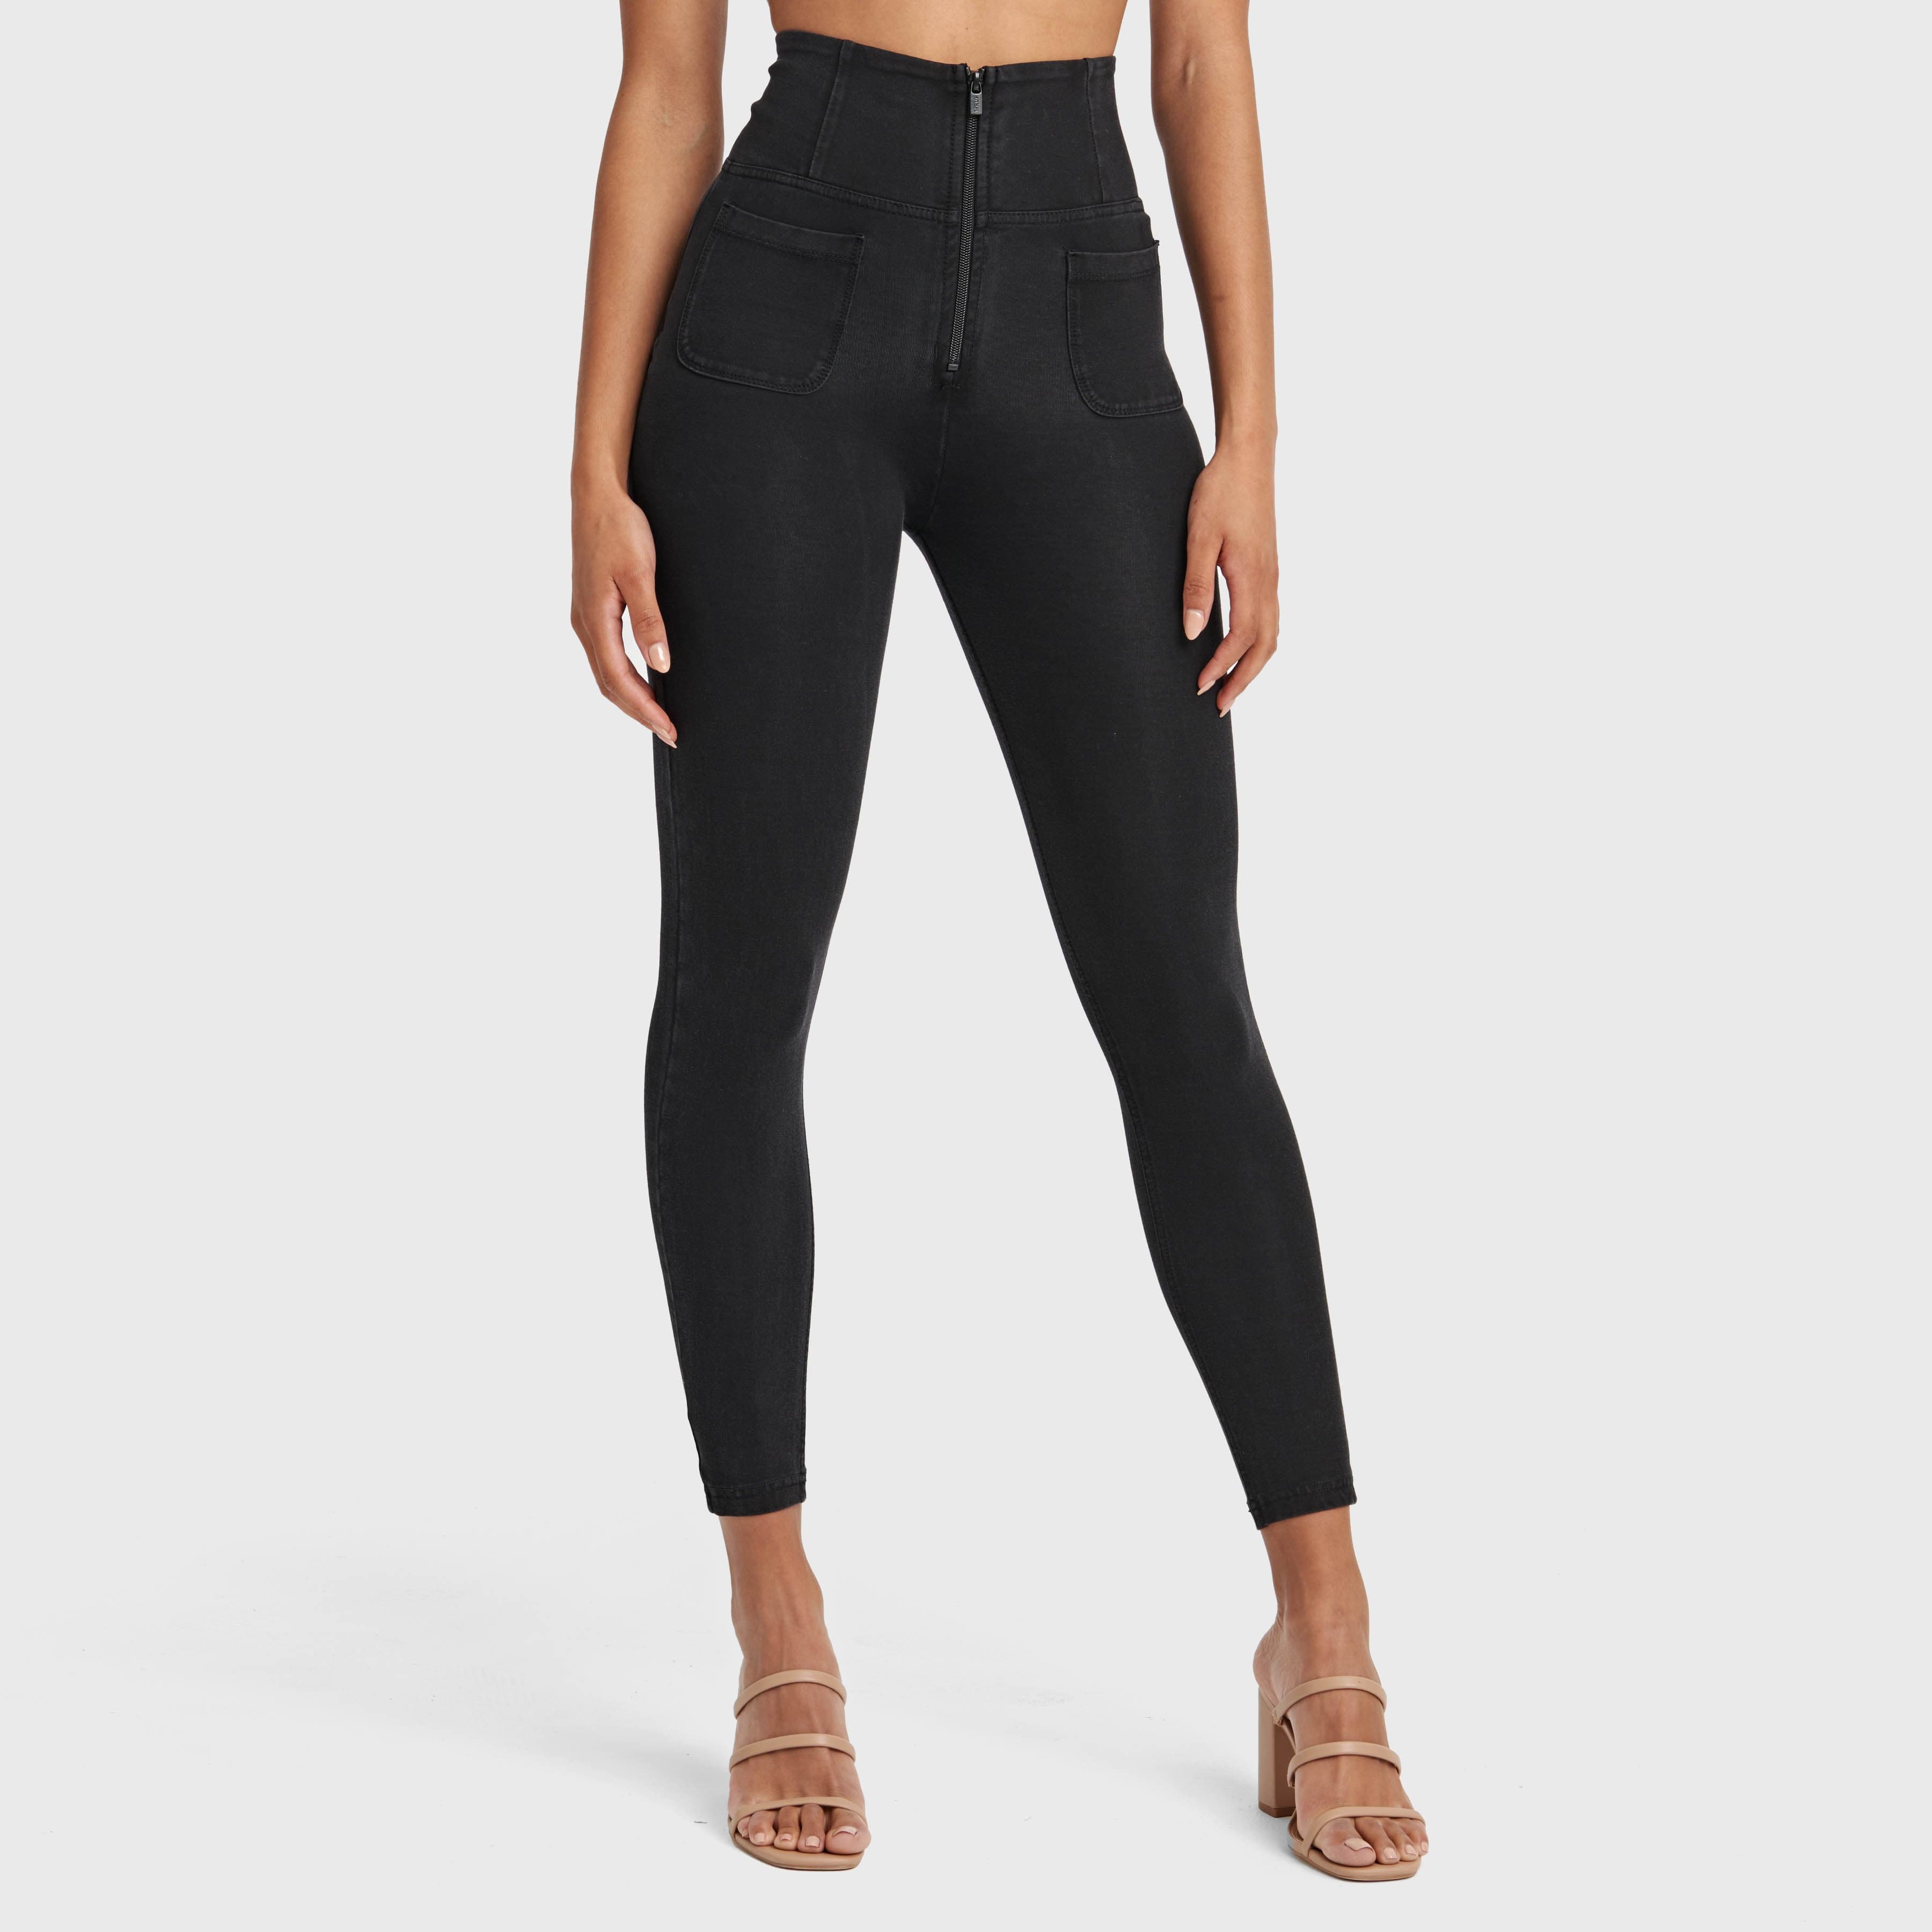 WR.UP® Denim With Front Pockets - Super High Waisted - 7/8 Length - Black + Black Stitching 1